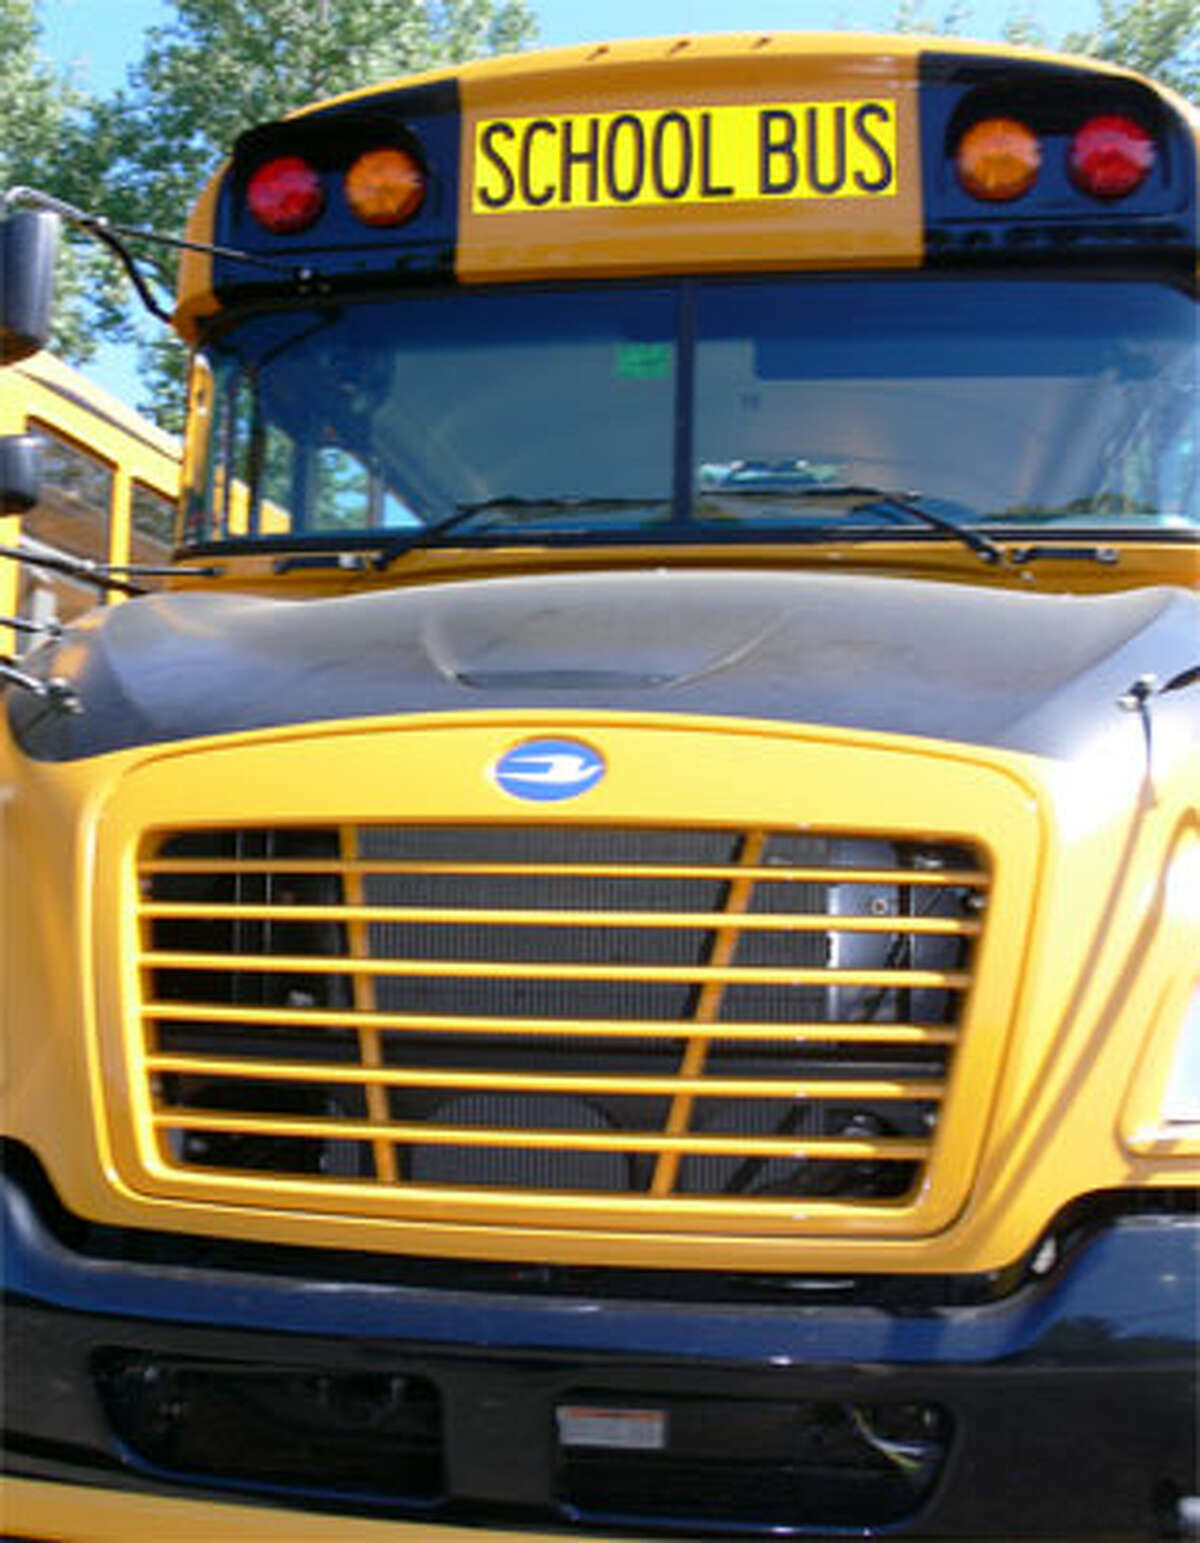 One of the city’s new propane-powered school buses.